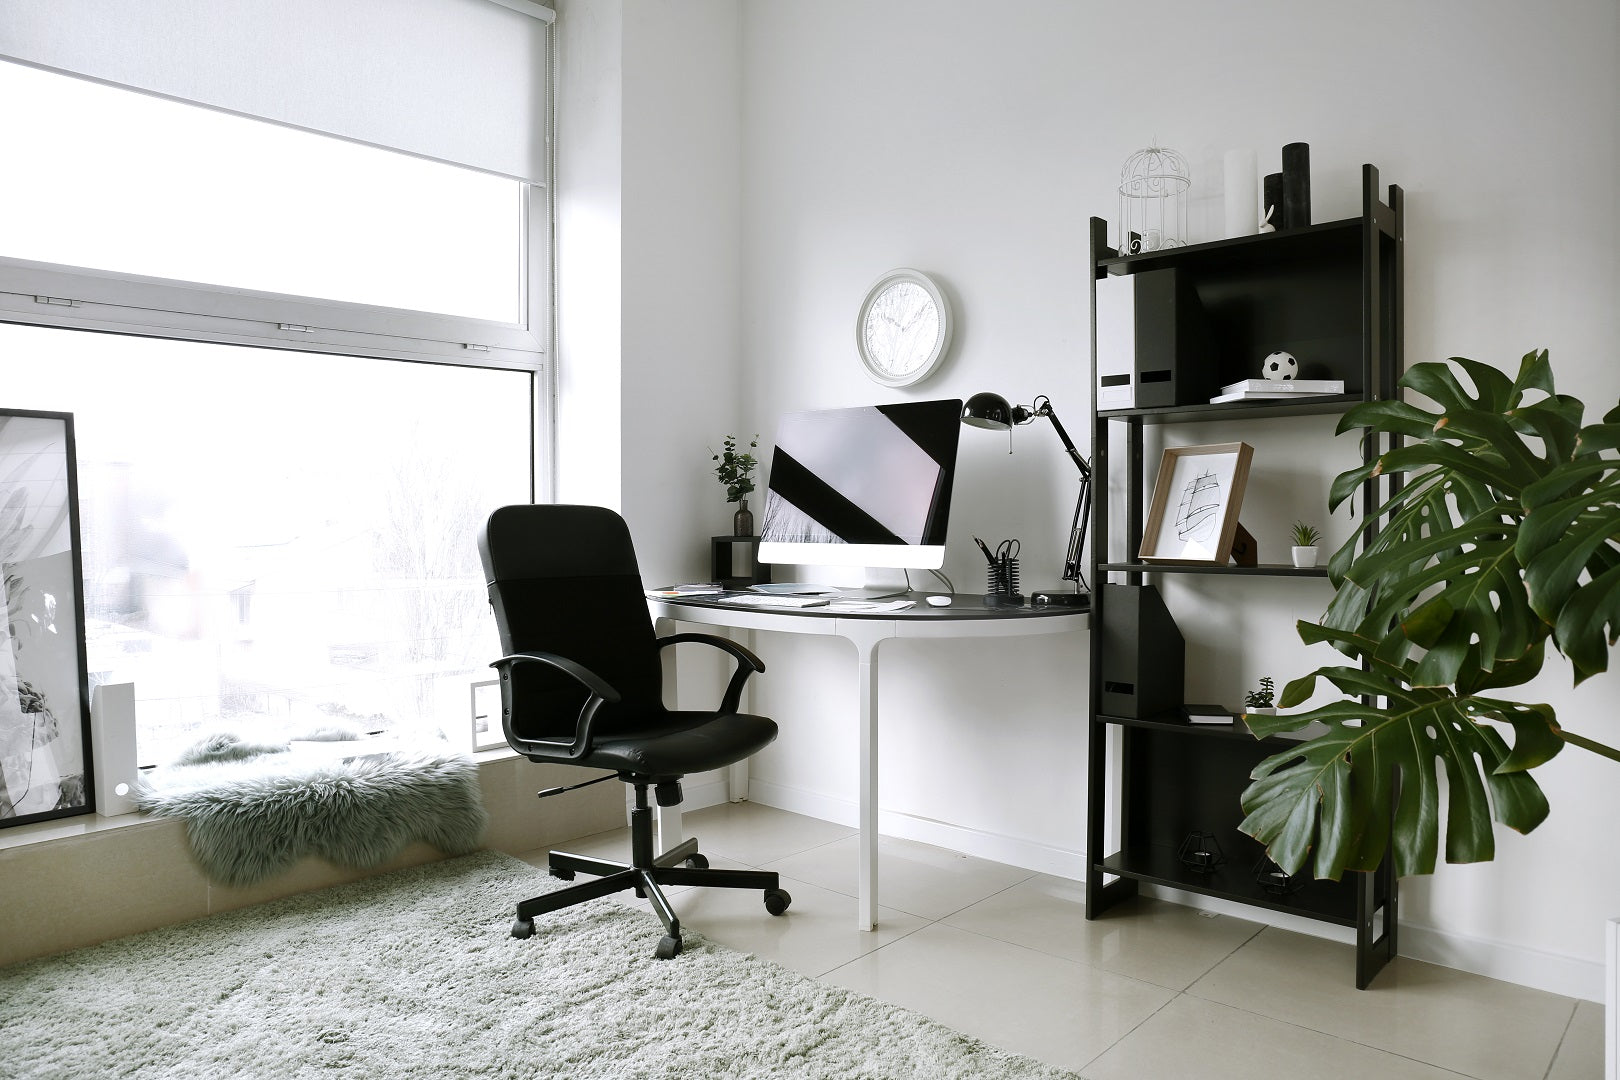 What Makes the Best Home Office?